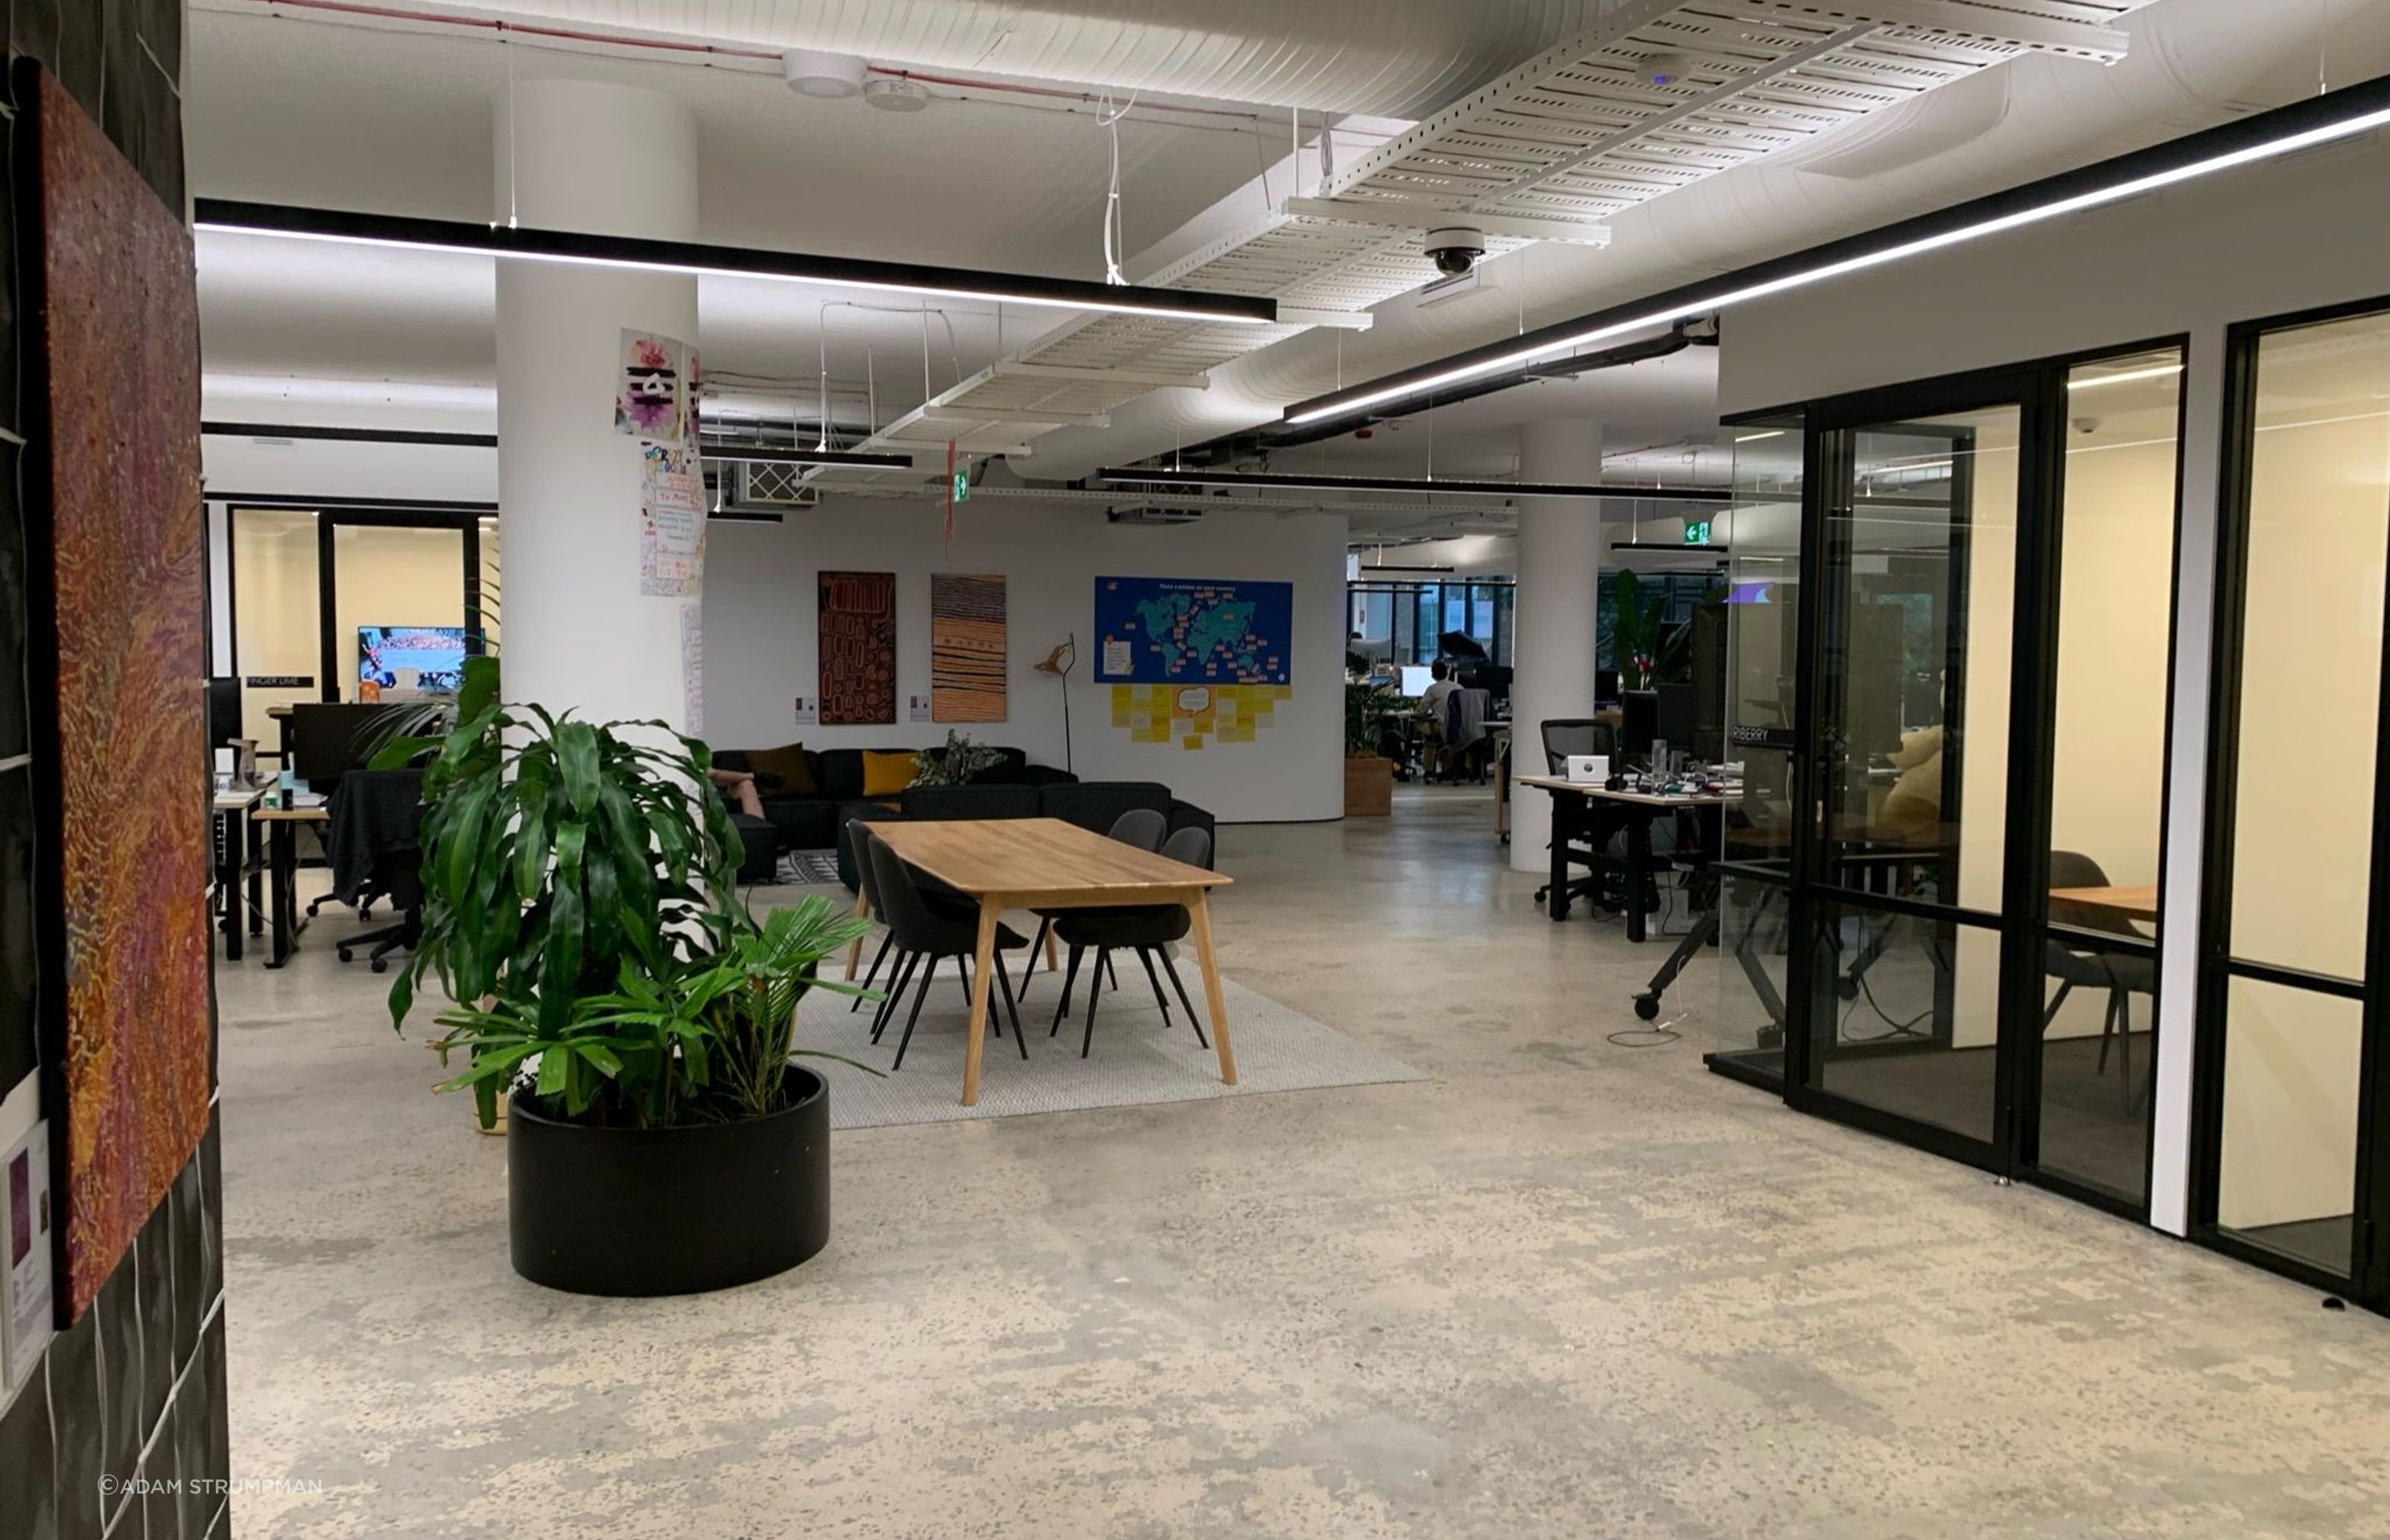 The Canva Offices in Surry Hills